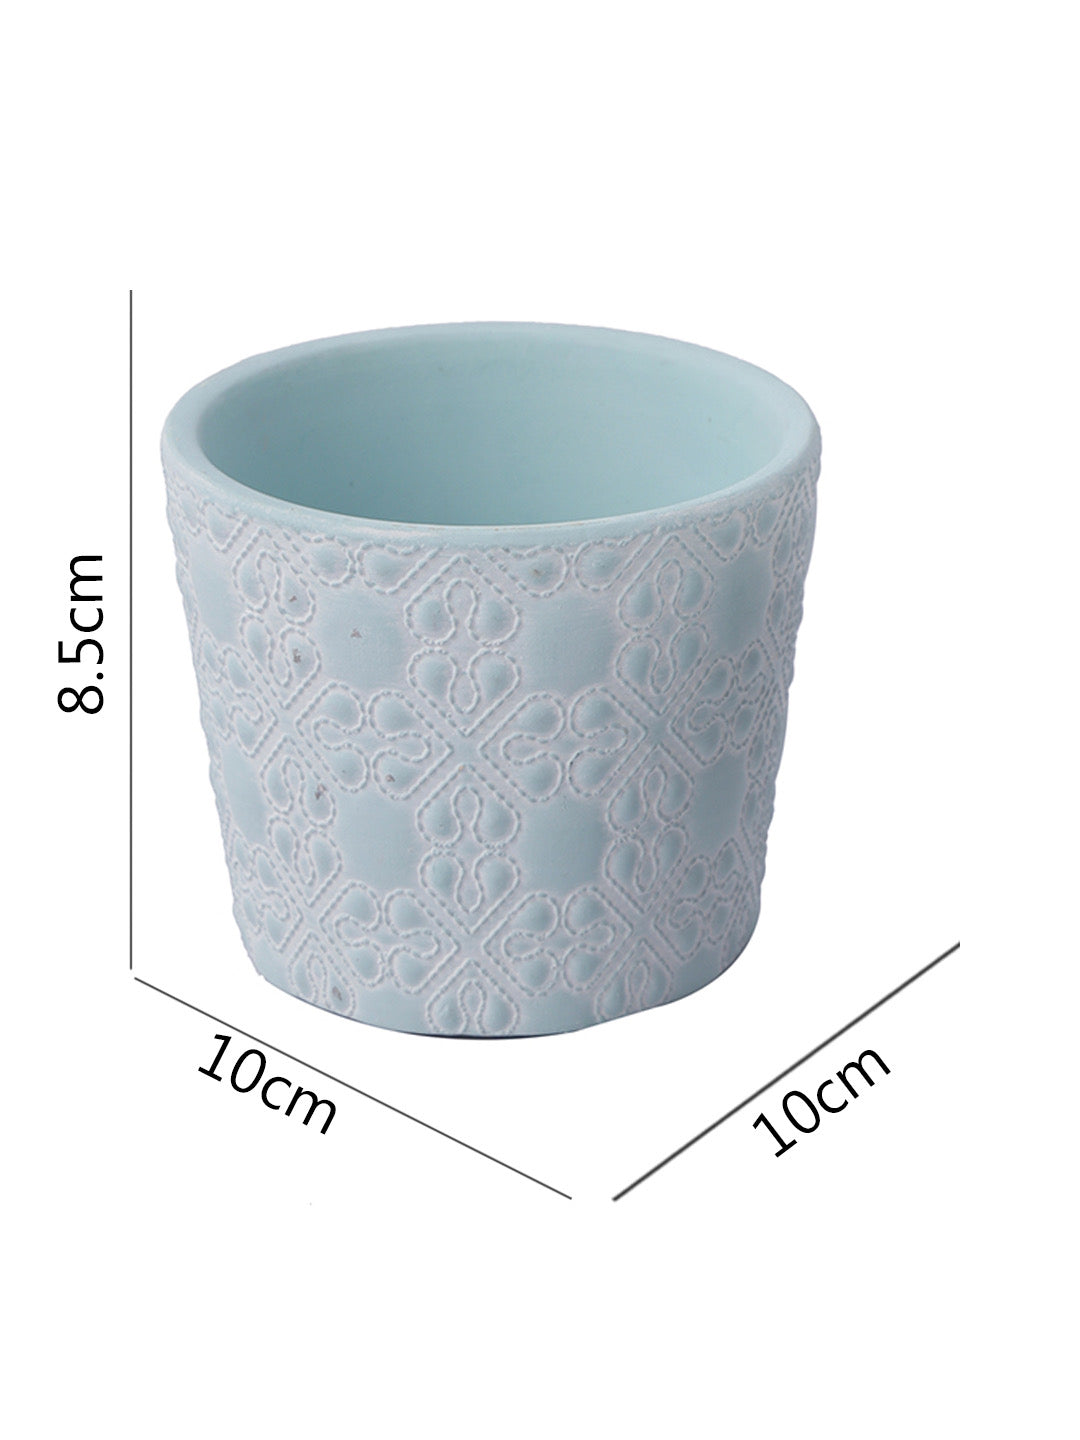 Two Blue and Grey Flower design Planters - Default Title (CH210077_2)